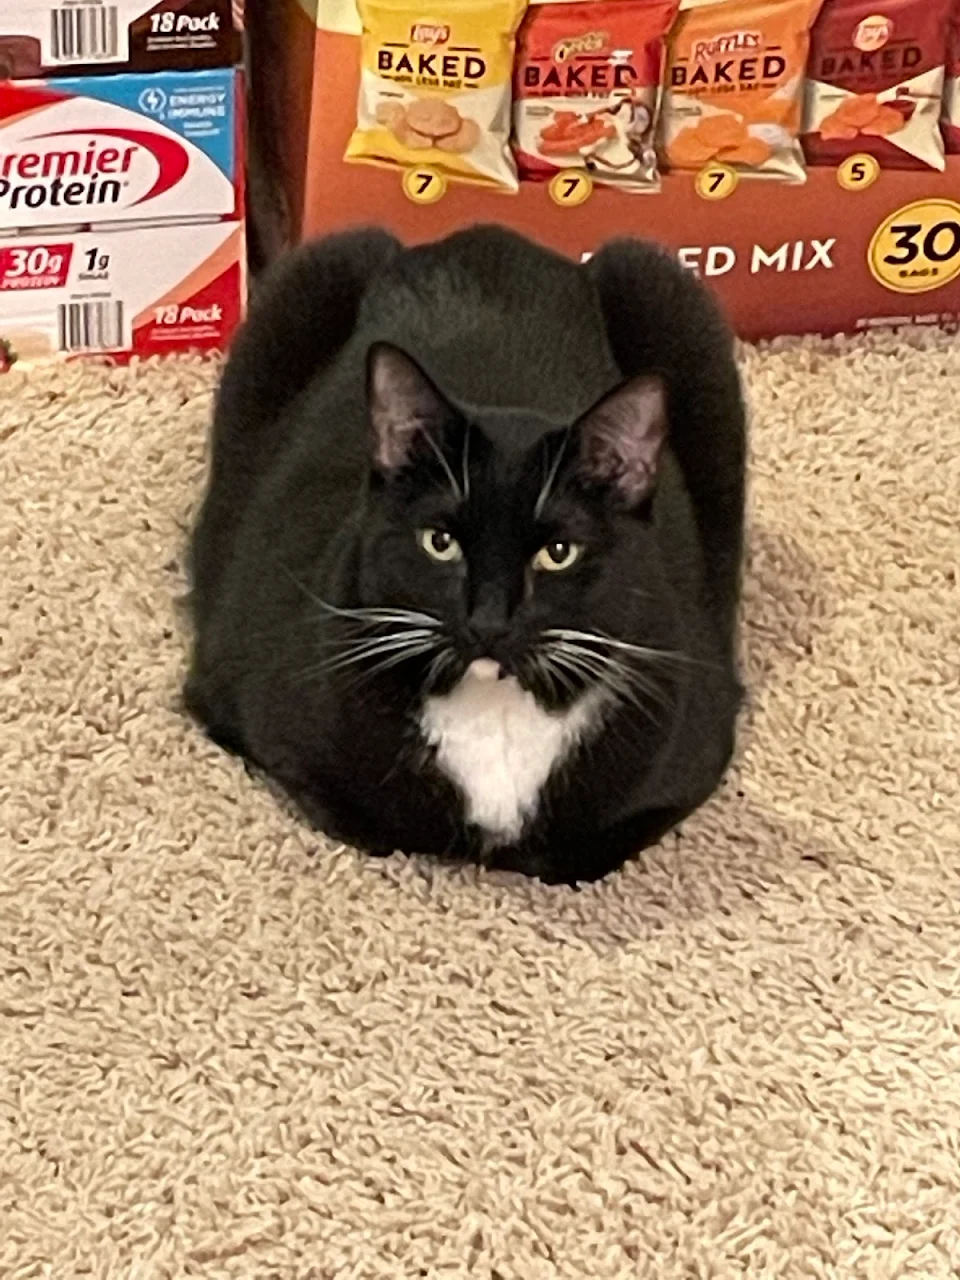 Moonrise delivers a perfect tuxedo loaf.